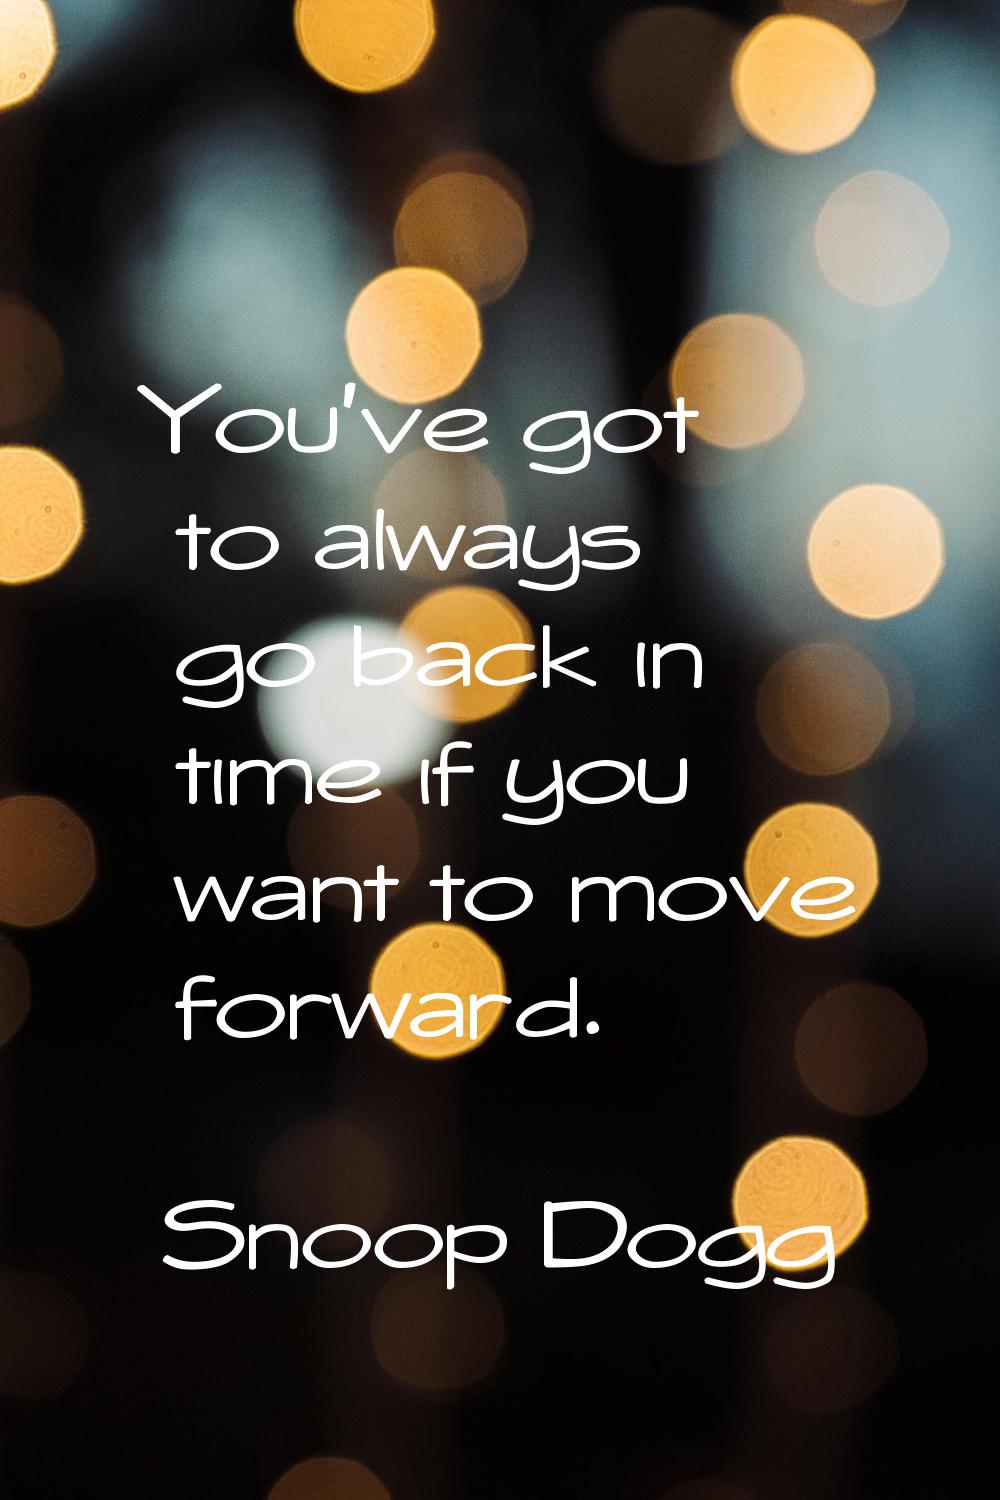 You've got to always go back in time if you want to move forward.